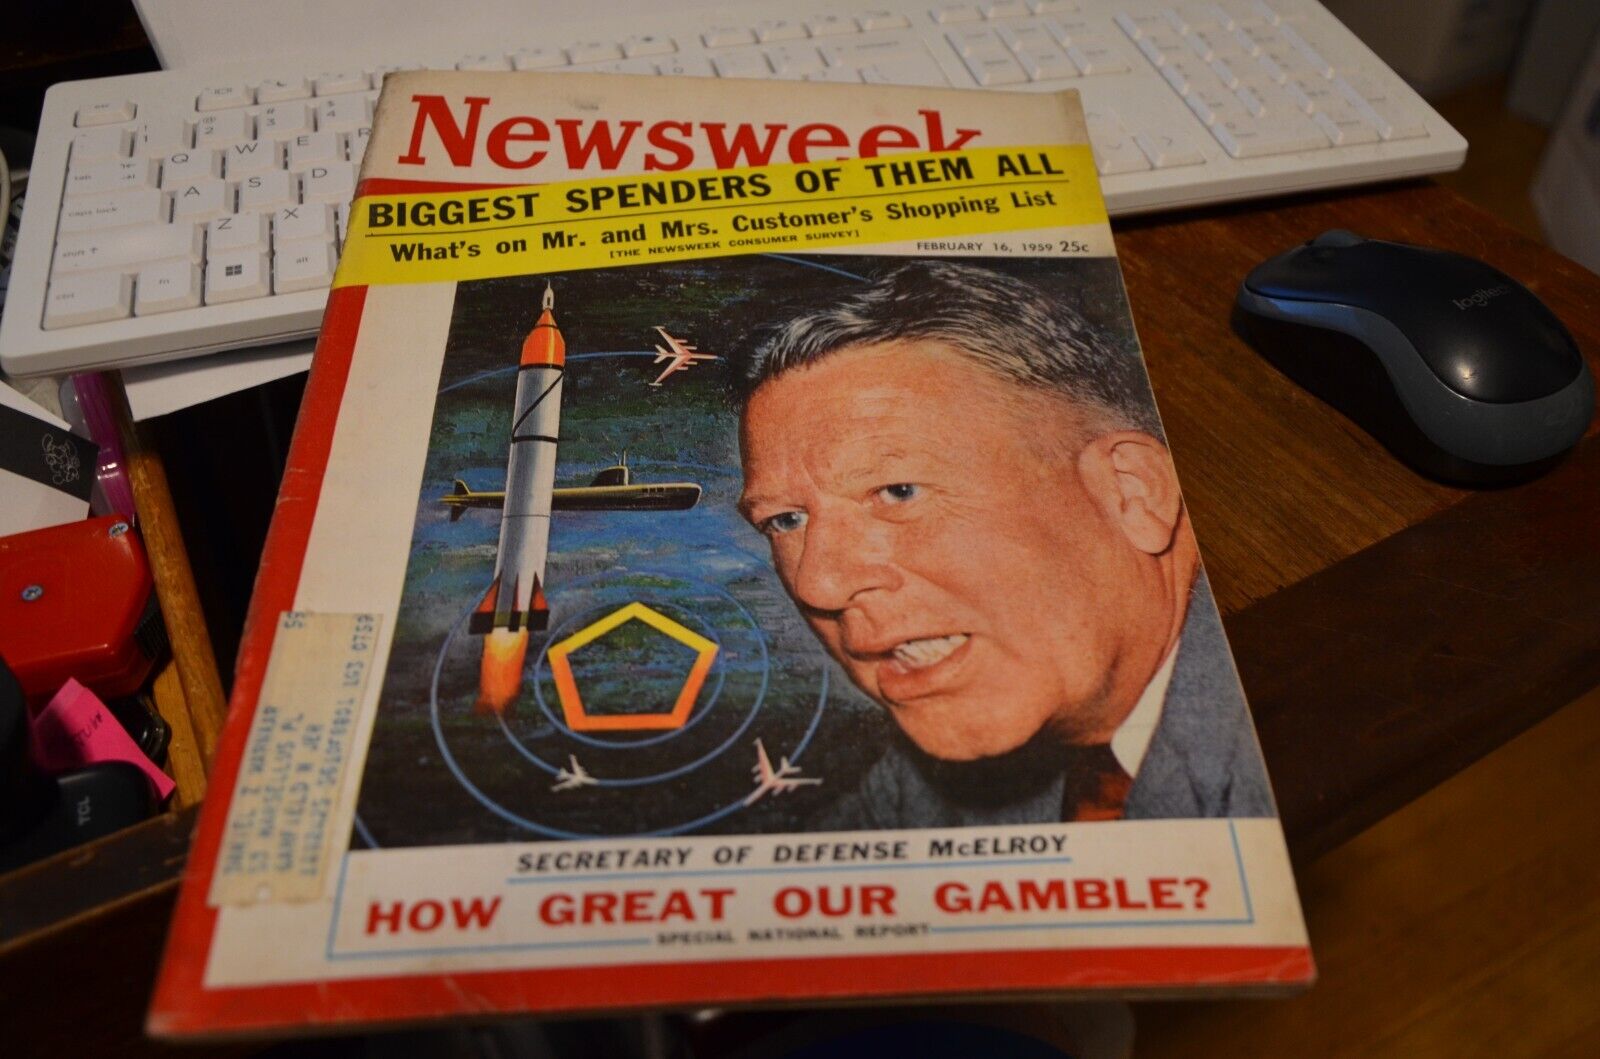 VTG Newsweek Magazine February 16 1959 Neil H. McElroy How Great Our Gamble?